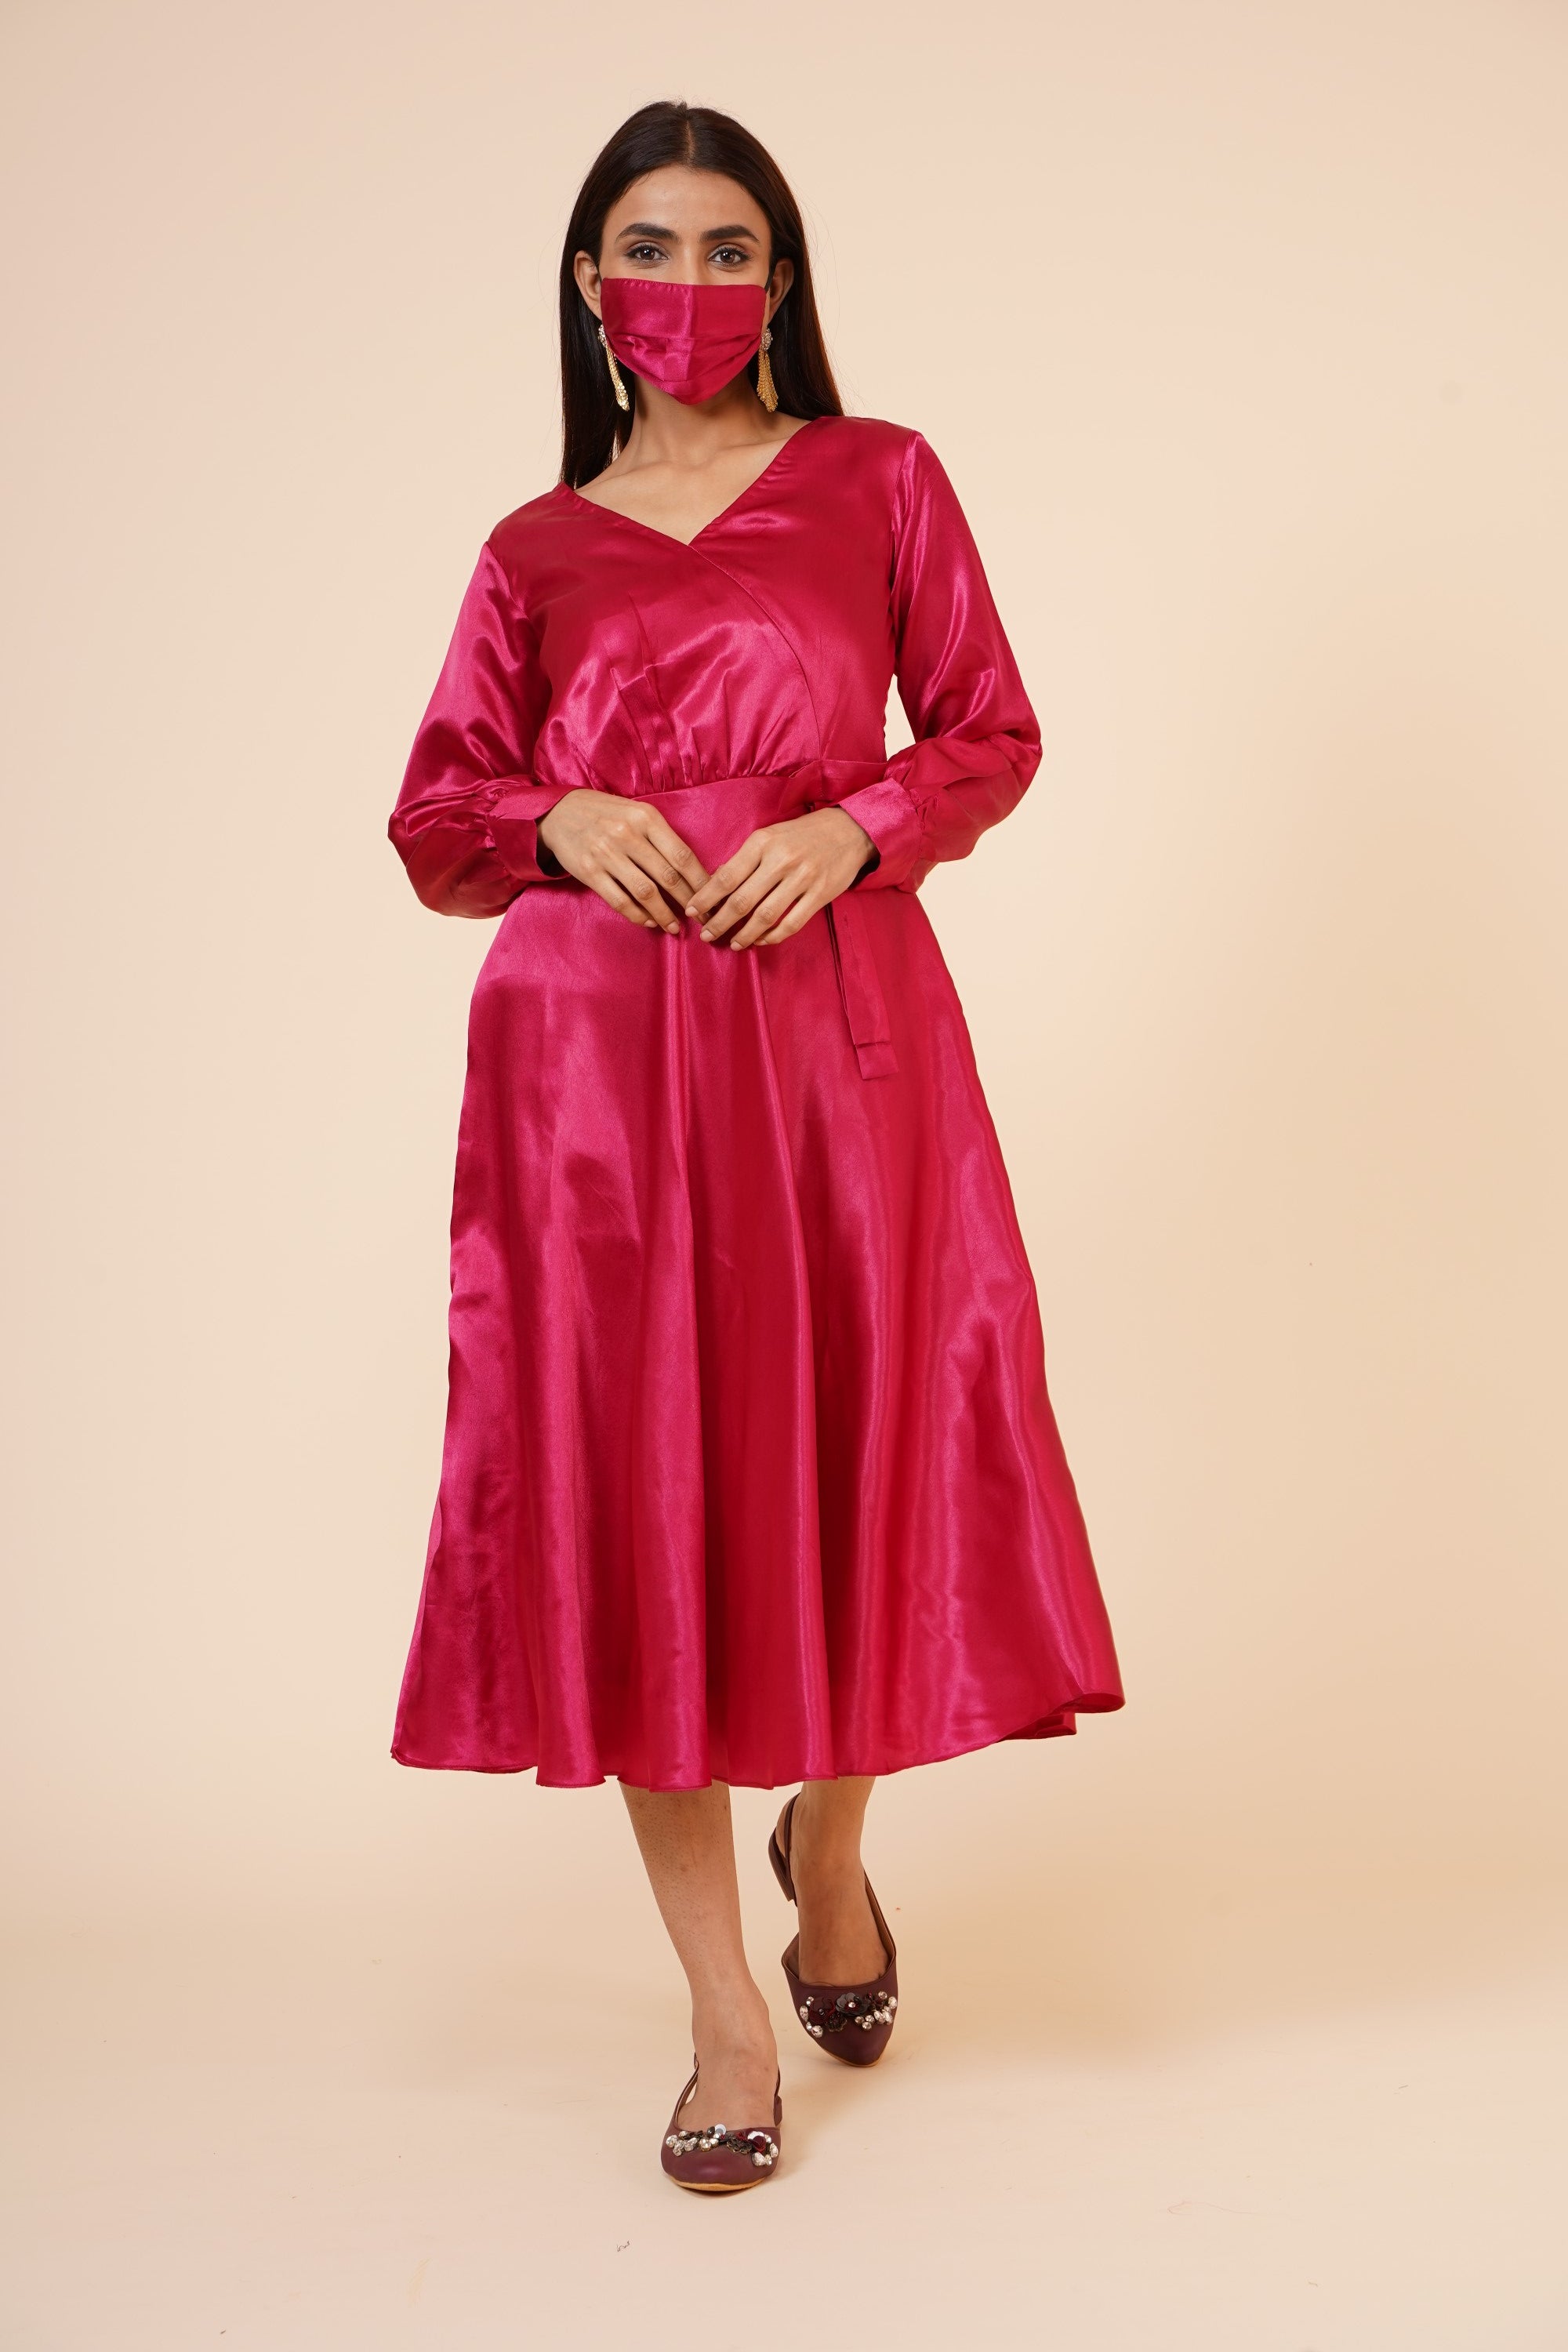 Women's Empire Line With Cuff Satin Wrap Dress Maroon - MIRACOLOS by Ruchi